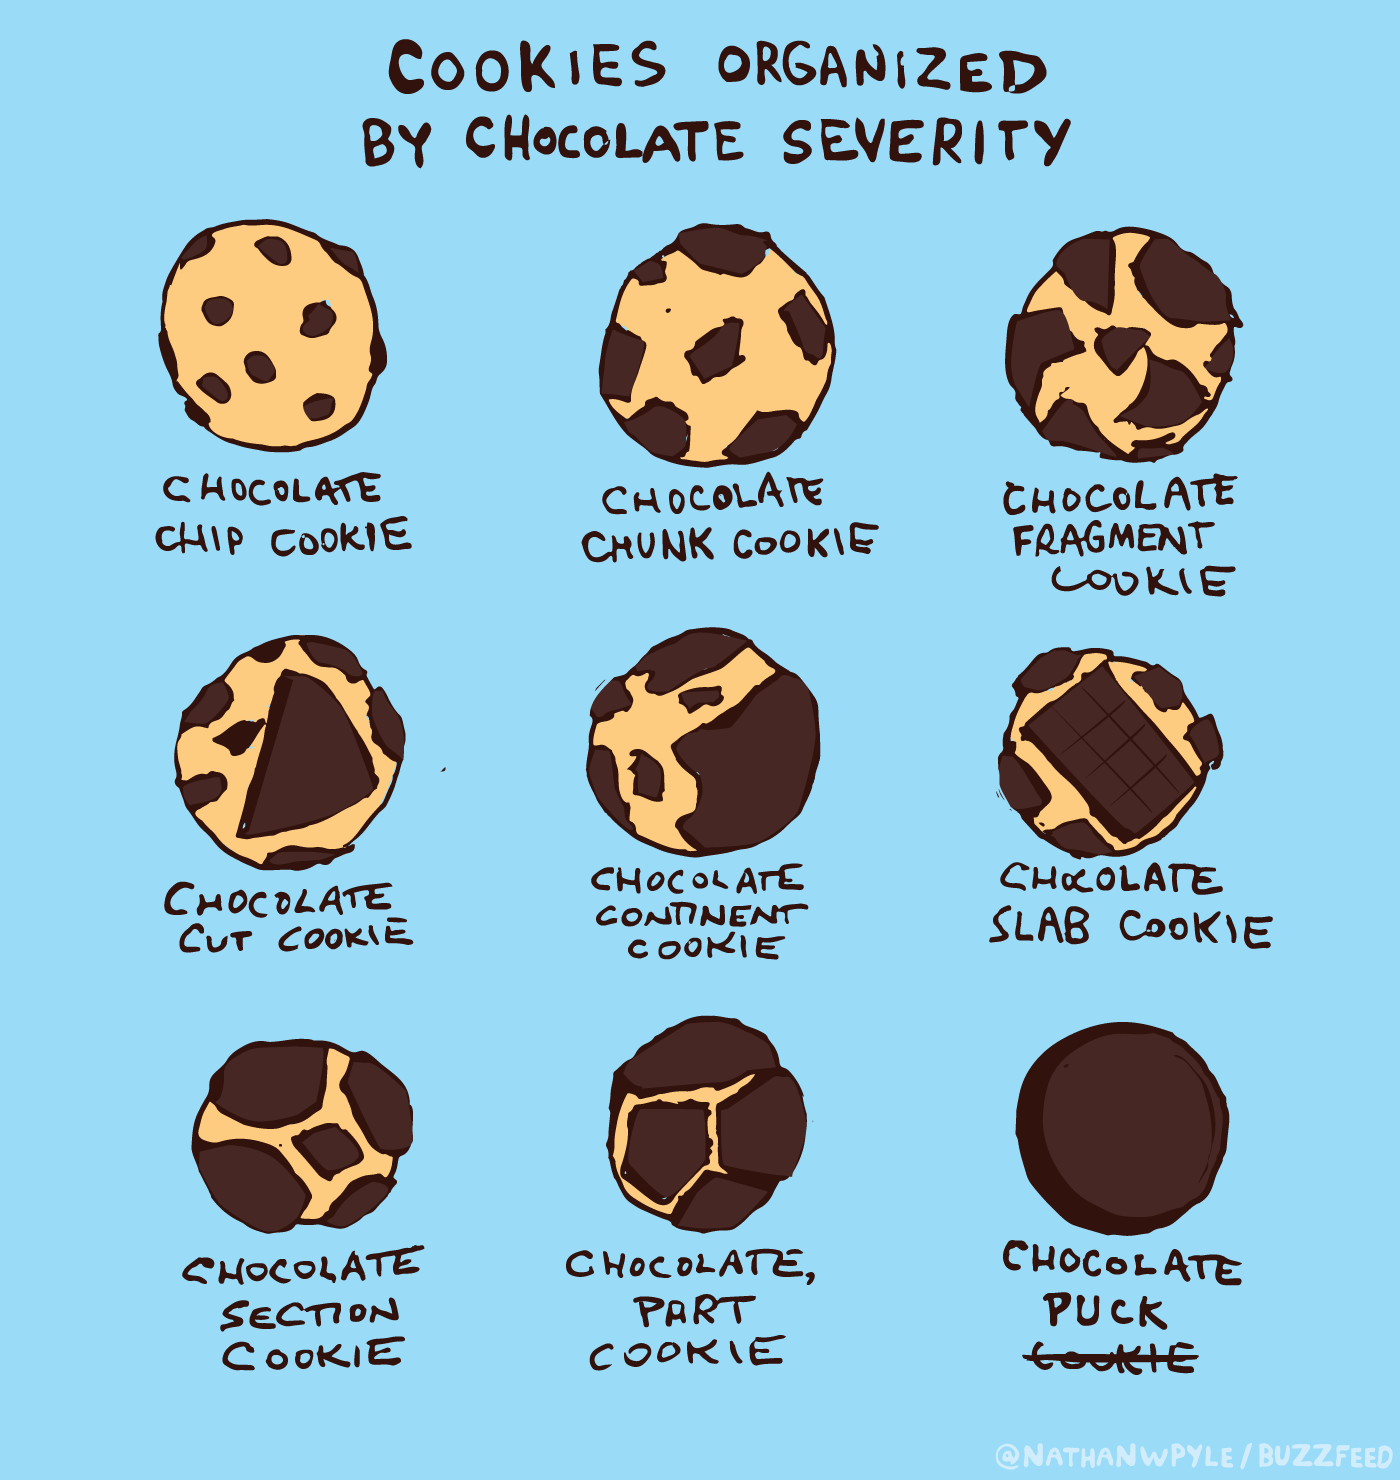 Chocolate Cookies by nathanwpyle